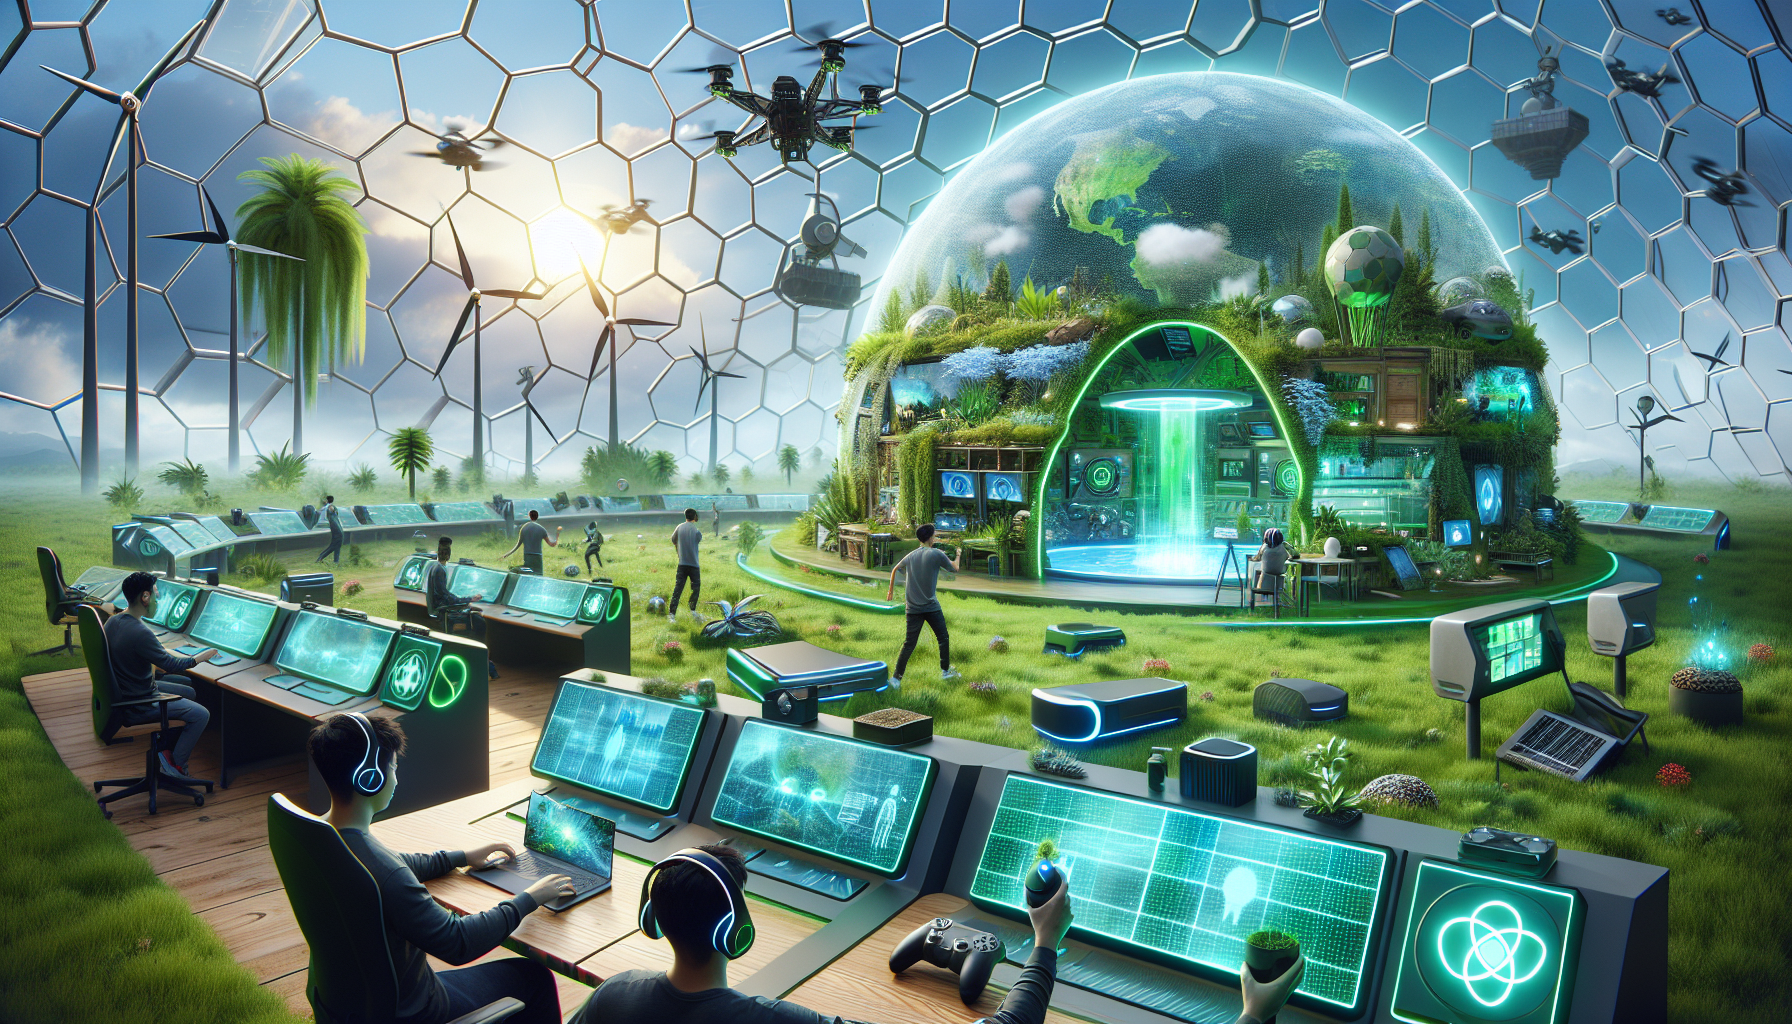 Valve's commitment to green technology and sustainability demonstrated in a futuristic gaming environment